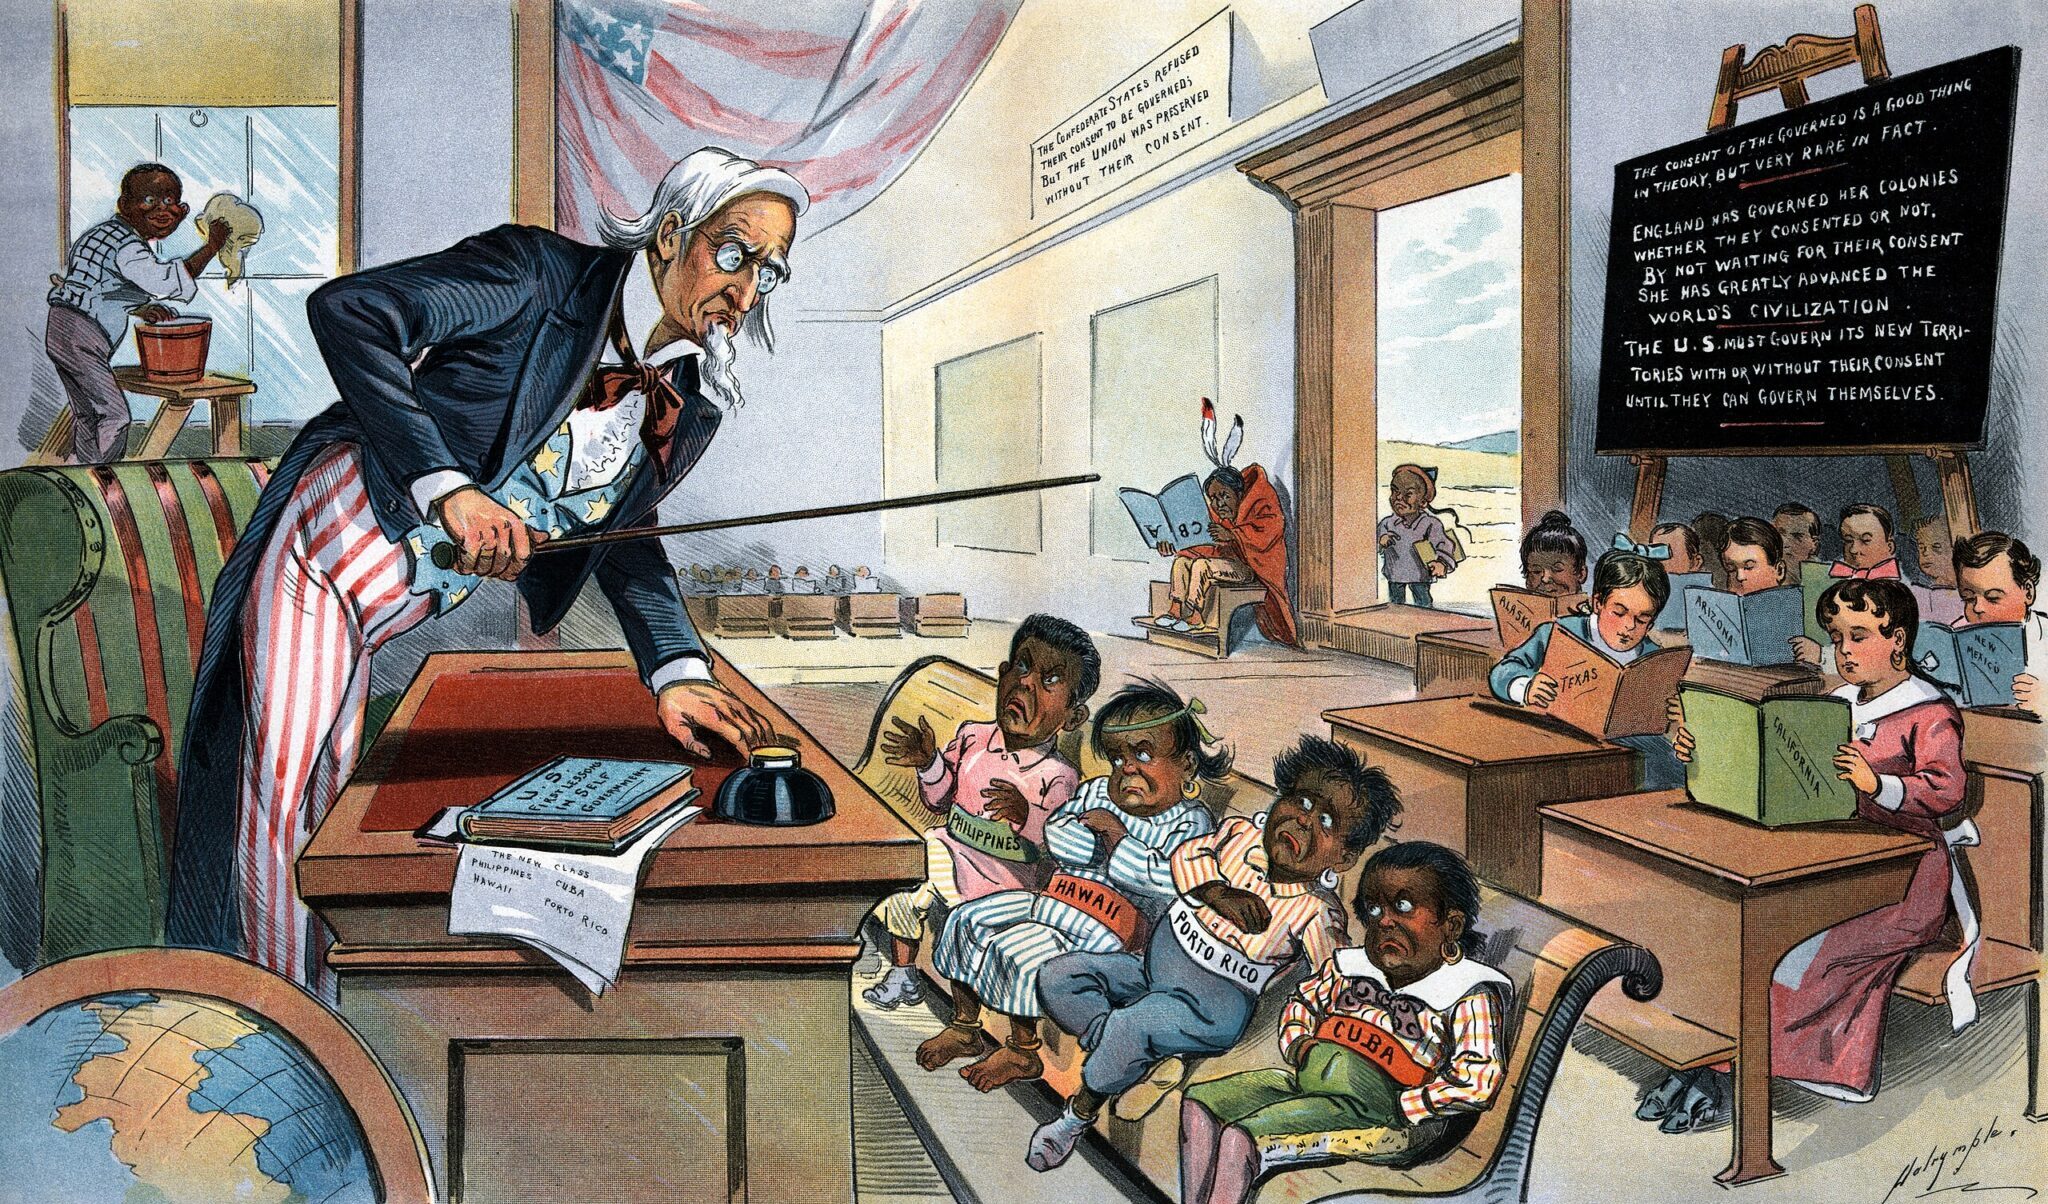 School Begins: Uncle Sam (to his new class in civilization).- Now, children, you've got to learn these lessons whether you want to or not! But just take a look at the class ahead of you, and remember that, in a little while, you will feel as glad to be here as they are!. Photo: Wikipedia.